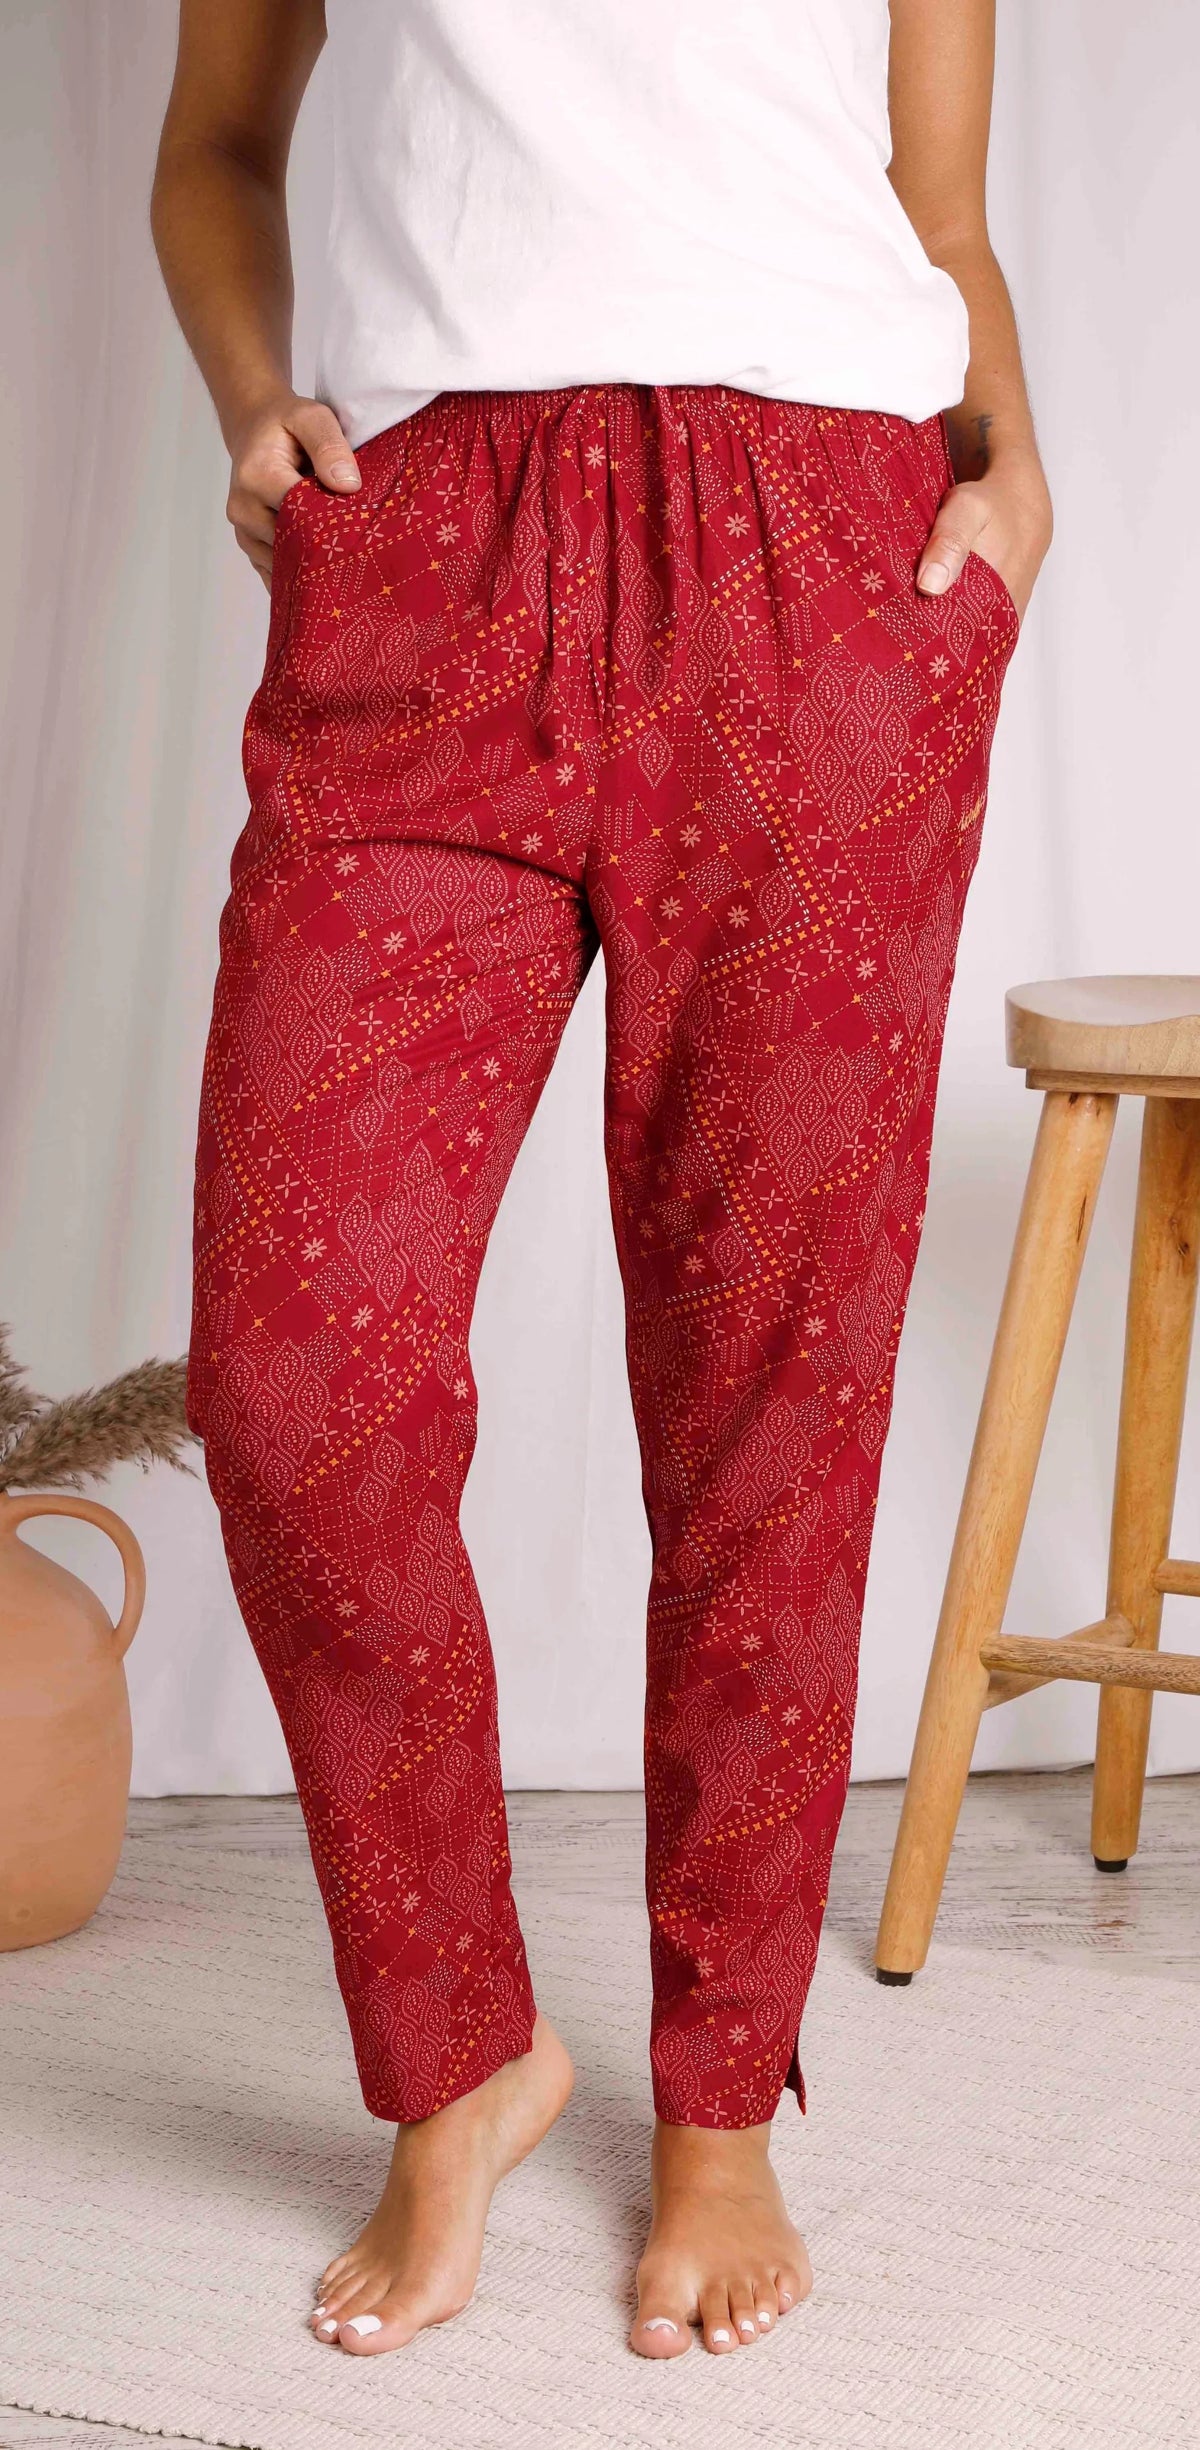 Moroccan style print women's viscose Tinto trousers from Weird Fish in Chilli Red.